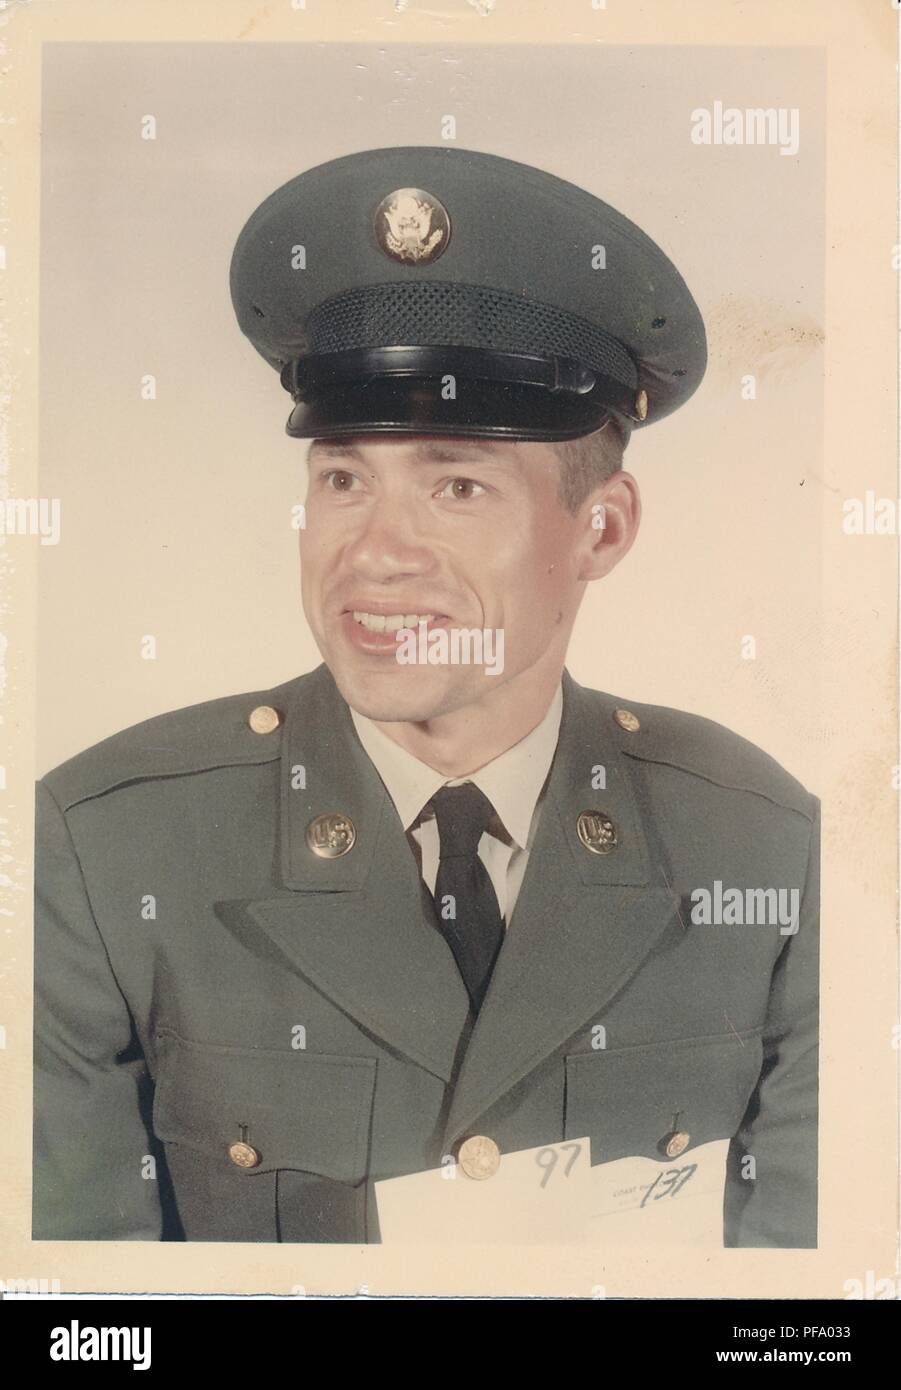 Color photograph of a male, US Army member, shown in three-quarter profile view, from the chest up, wearing hat and uniform, and smiling, 1984. () Stock Photo